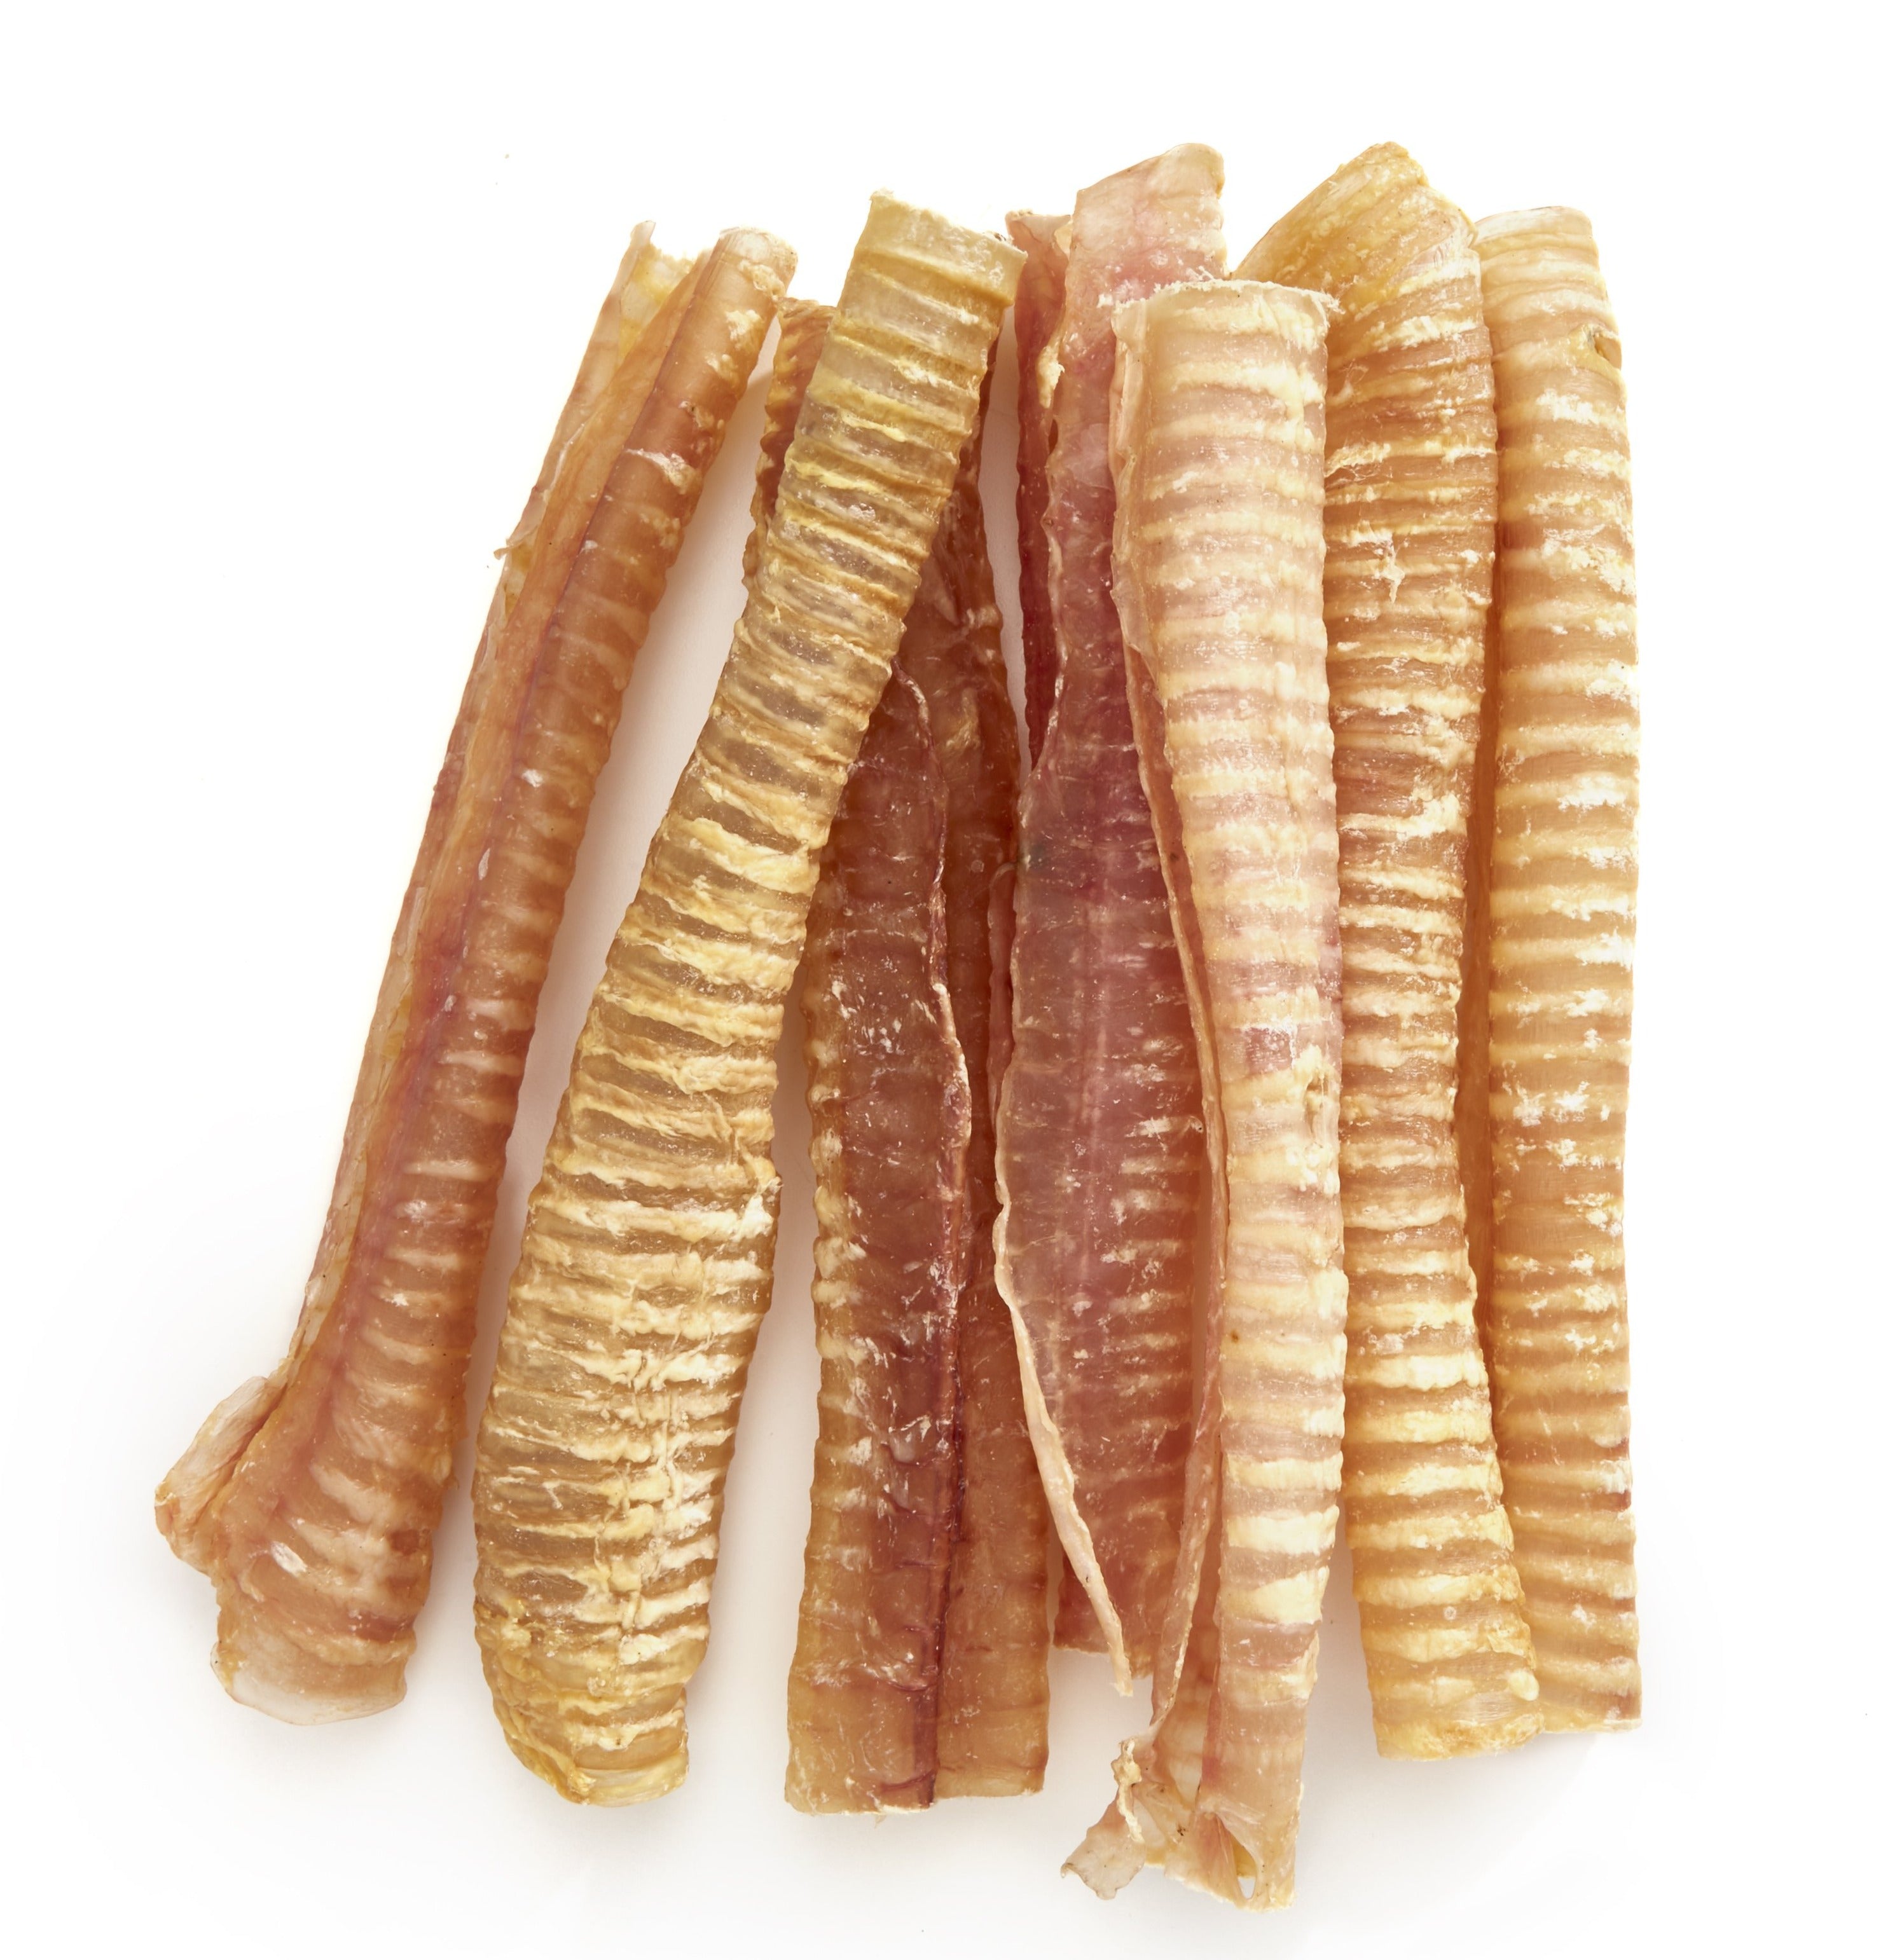 12 Inch Food Near Me 12 Inch Beef Trachea for Dogs | Buy Beef Trachea Dog Chews Online - Natural  Farm